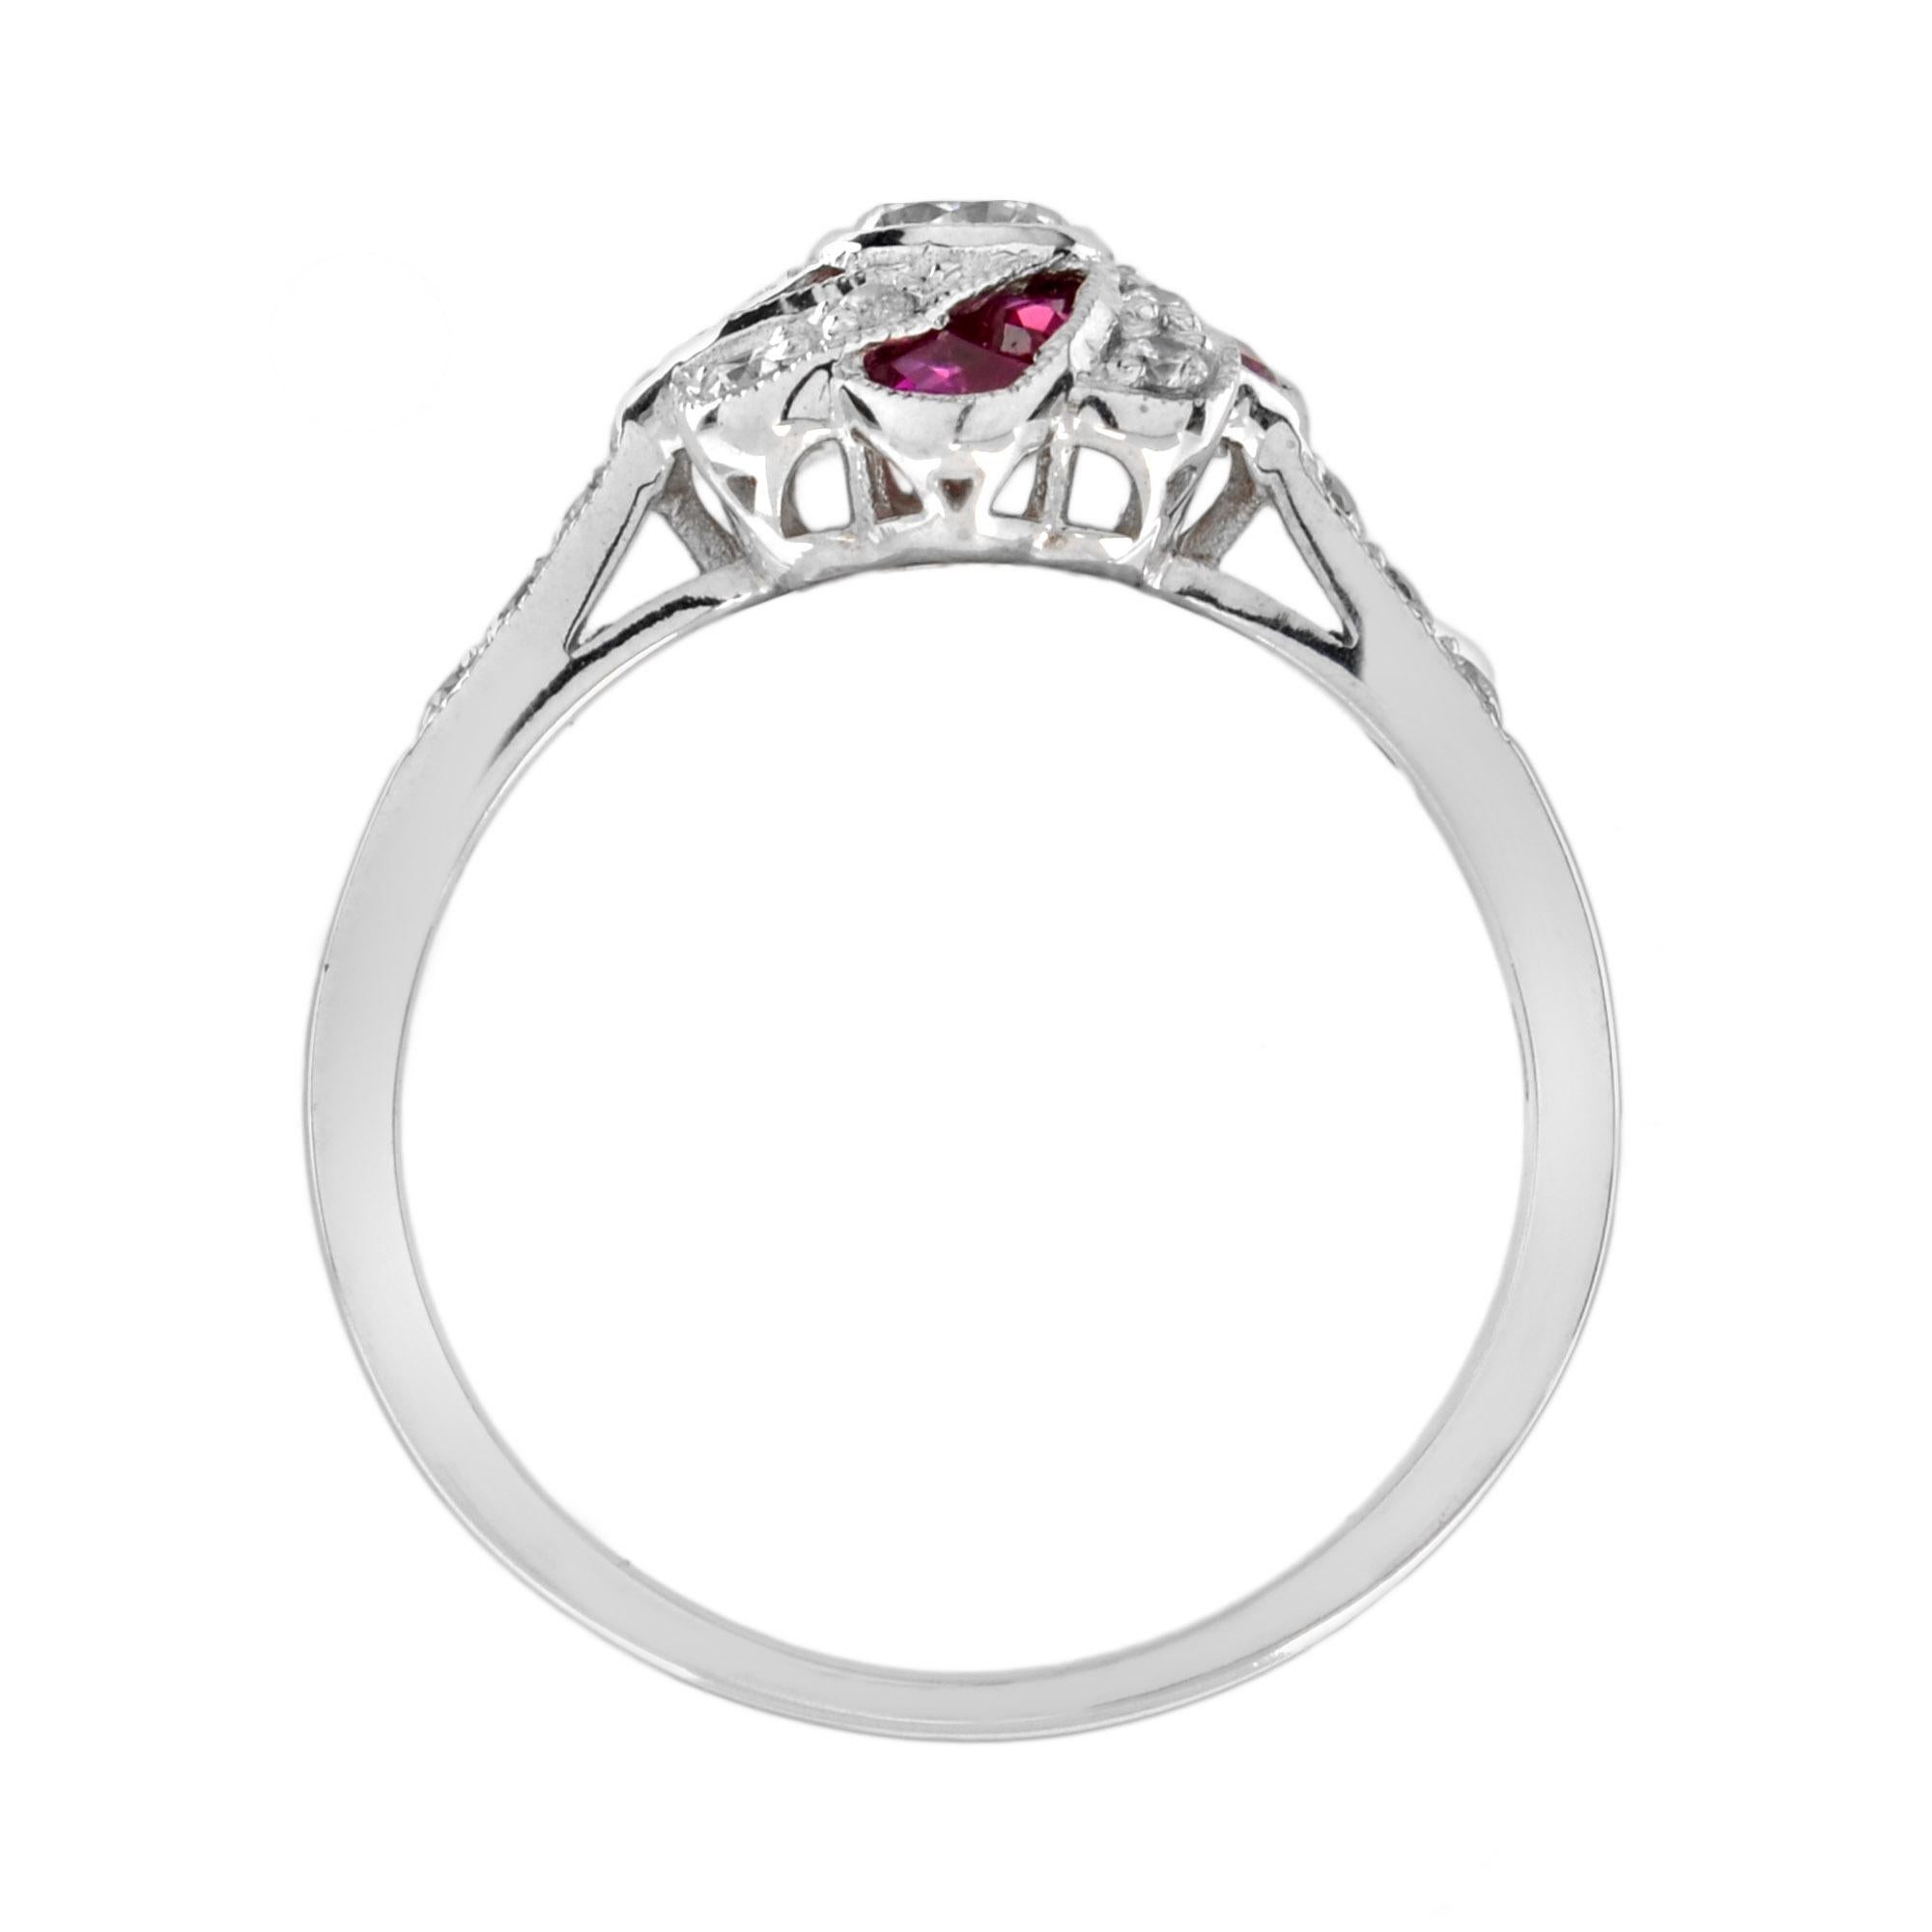 For Sale:  Art Deco Style Diamond and Ruby Floral Engagement Ring in 18K White Gold 6